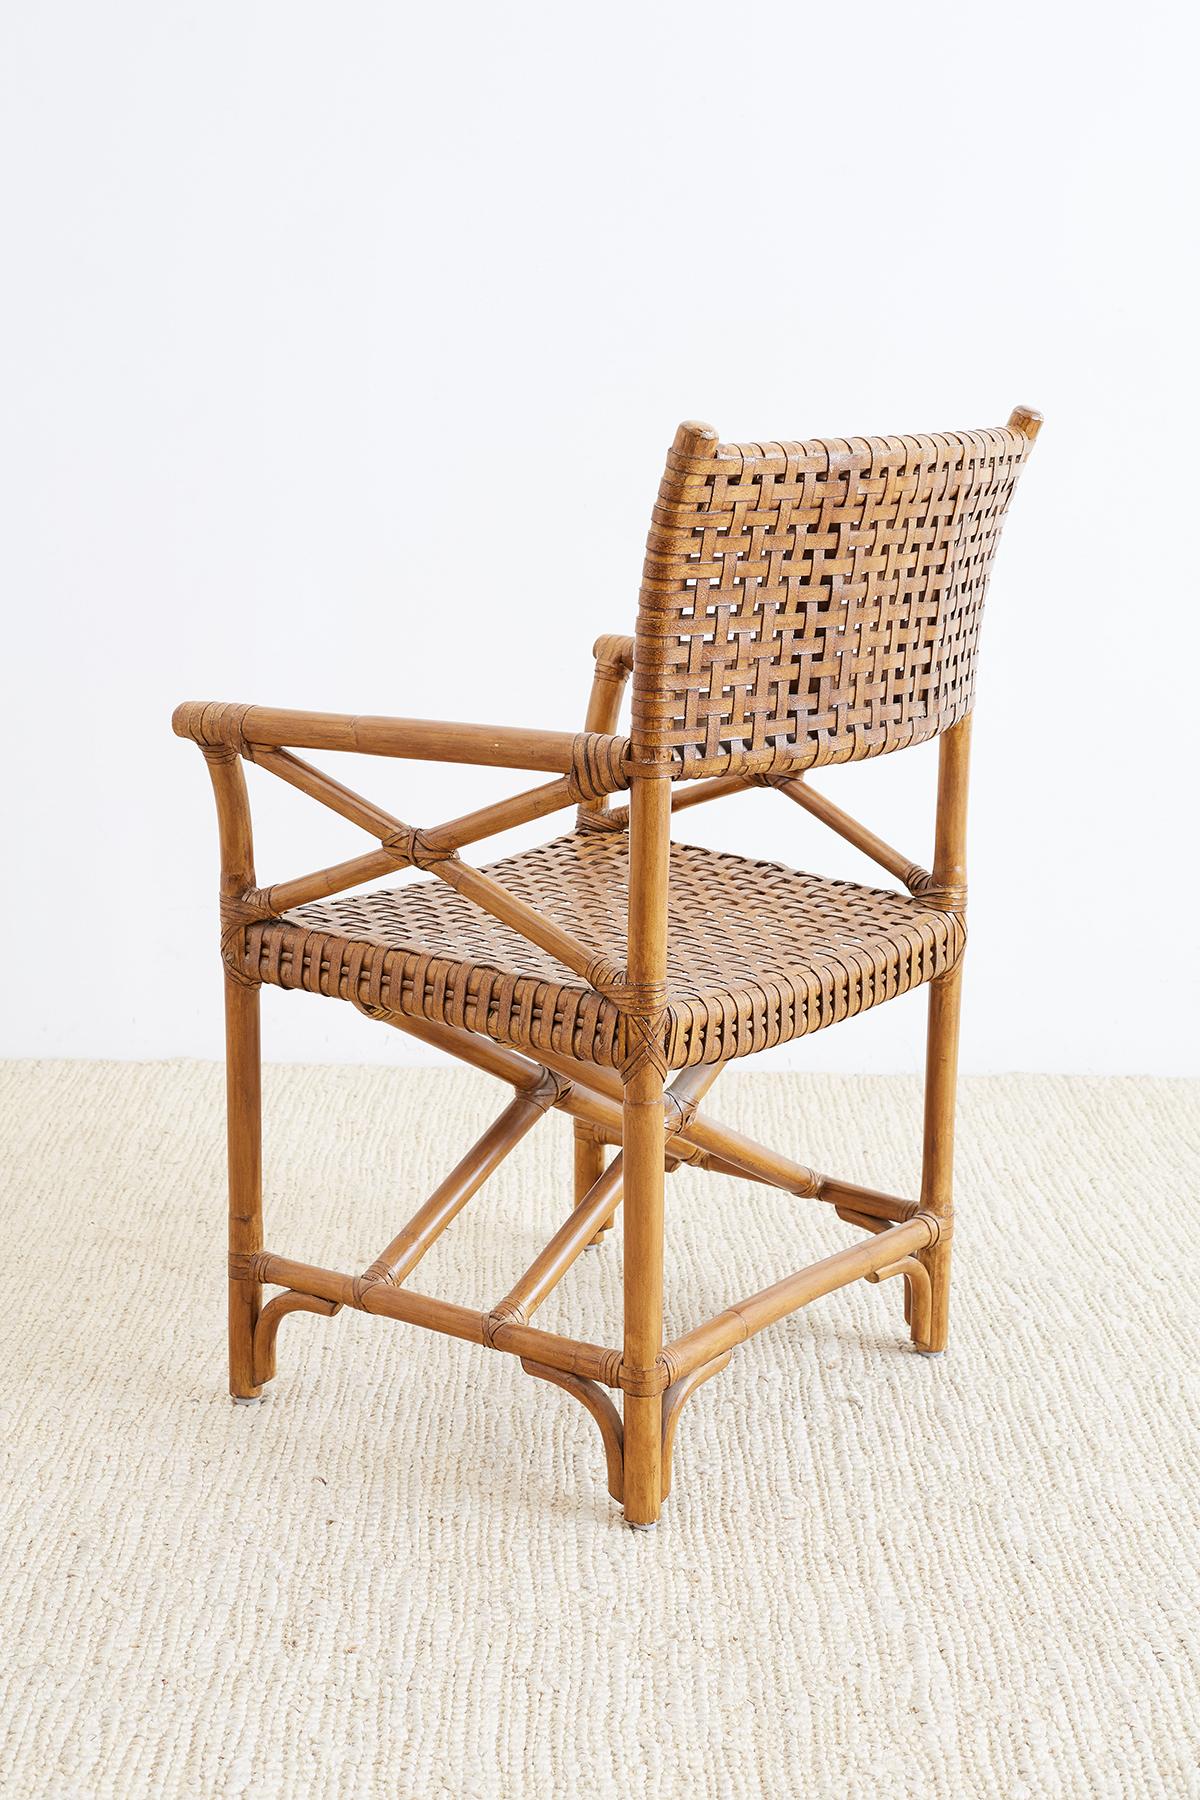 Organic Modern McGuire Style Woven Leather Rattan Dining Chairs